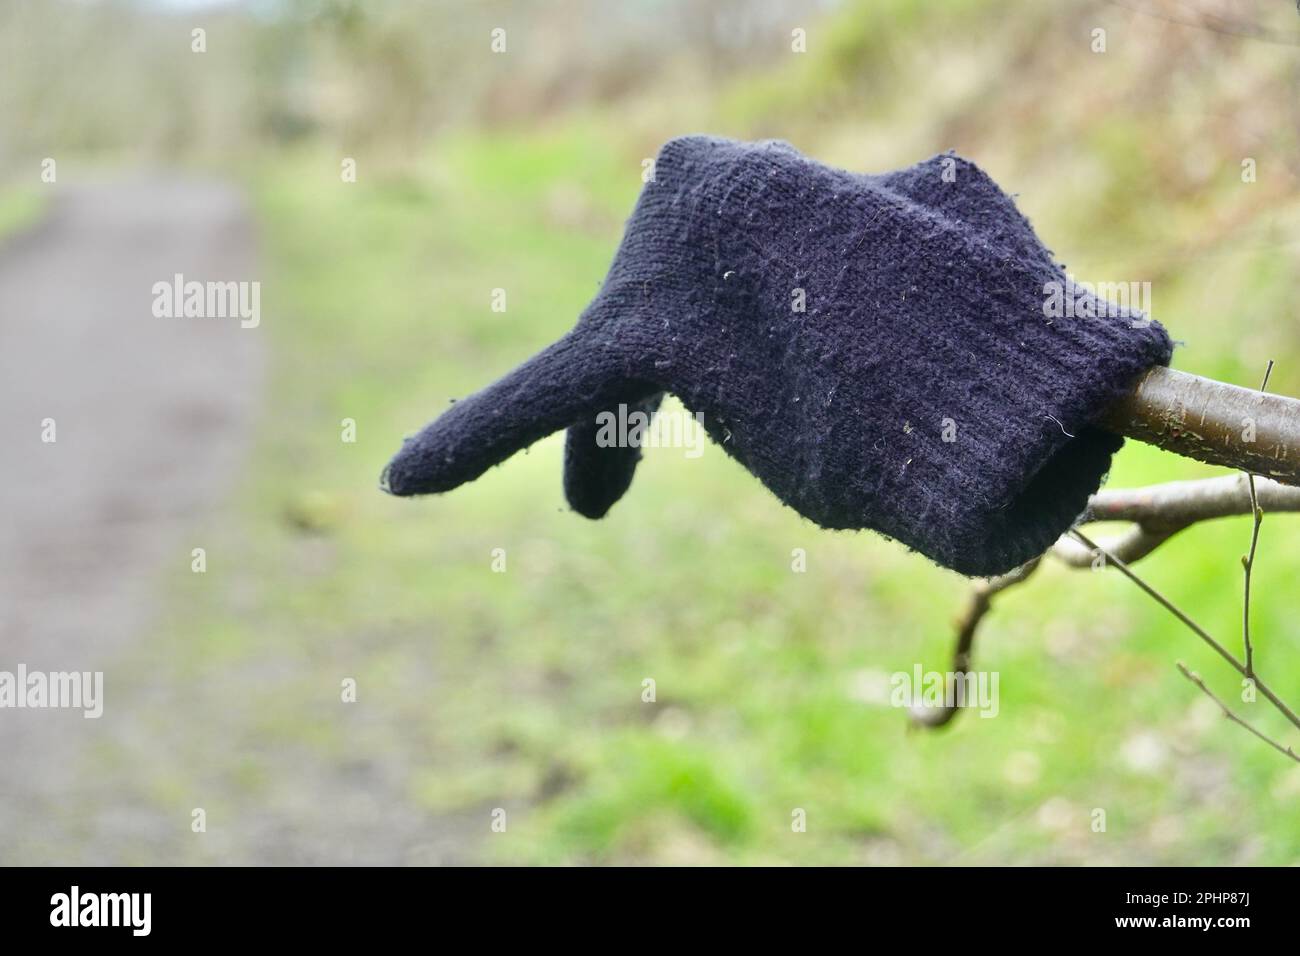 A lost glove hanging on a branch Stock Photo